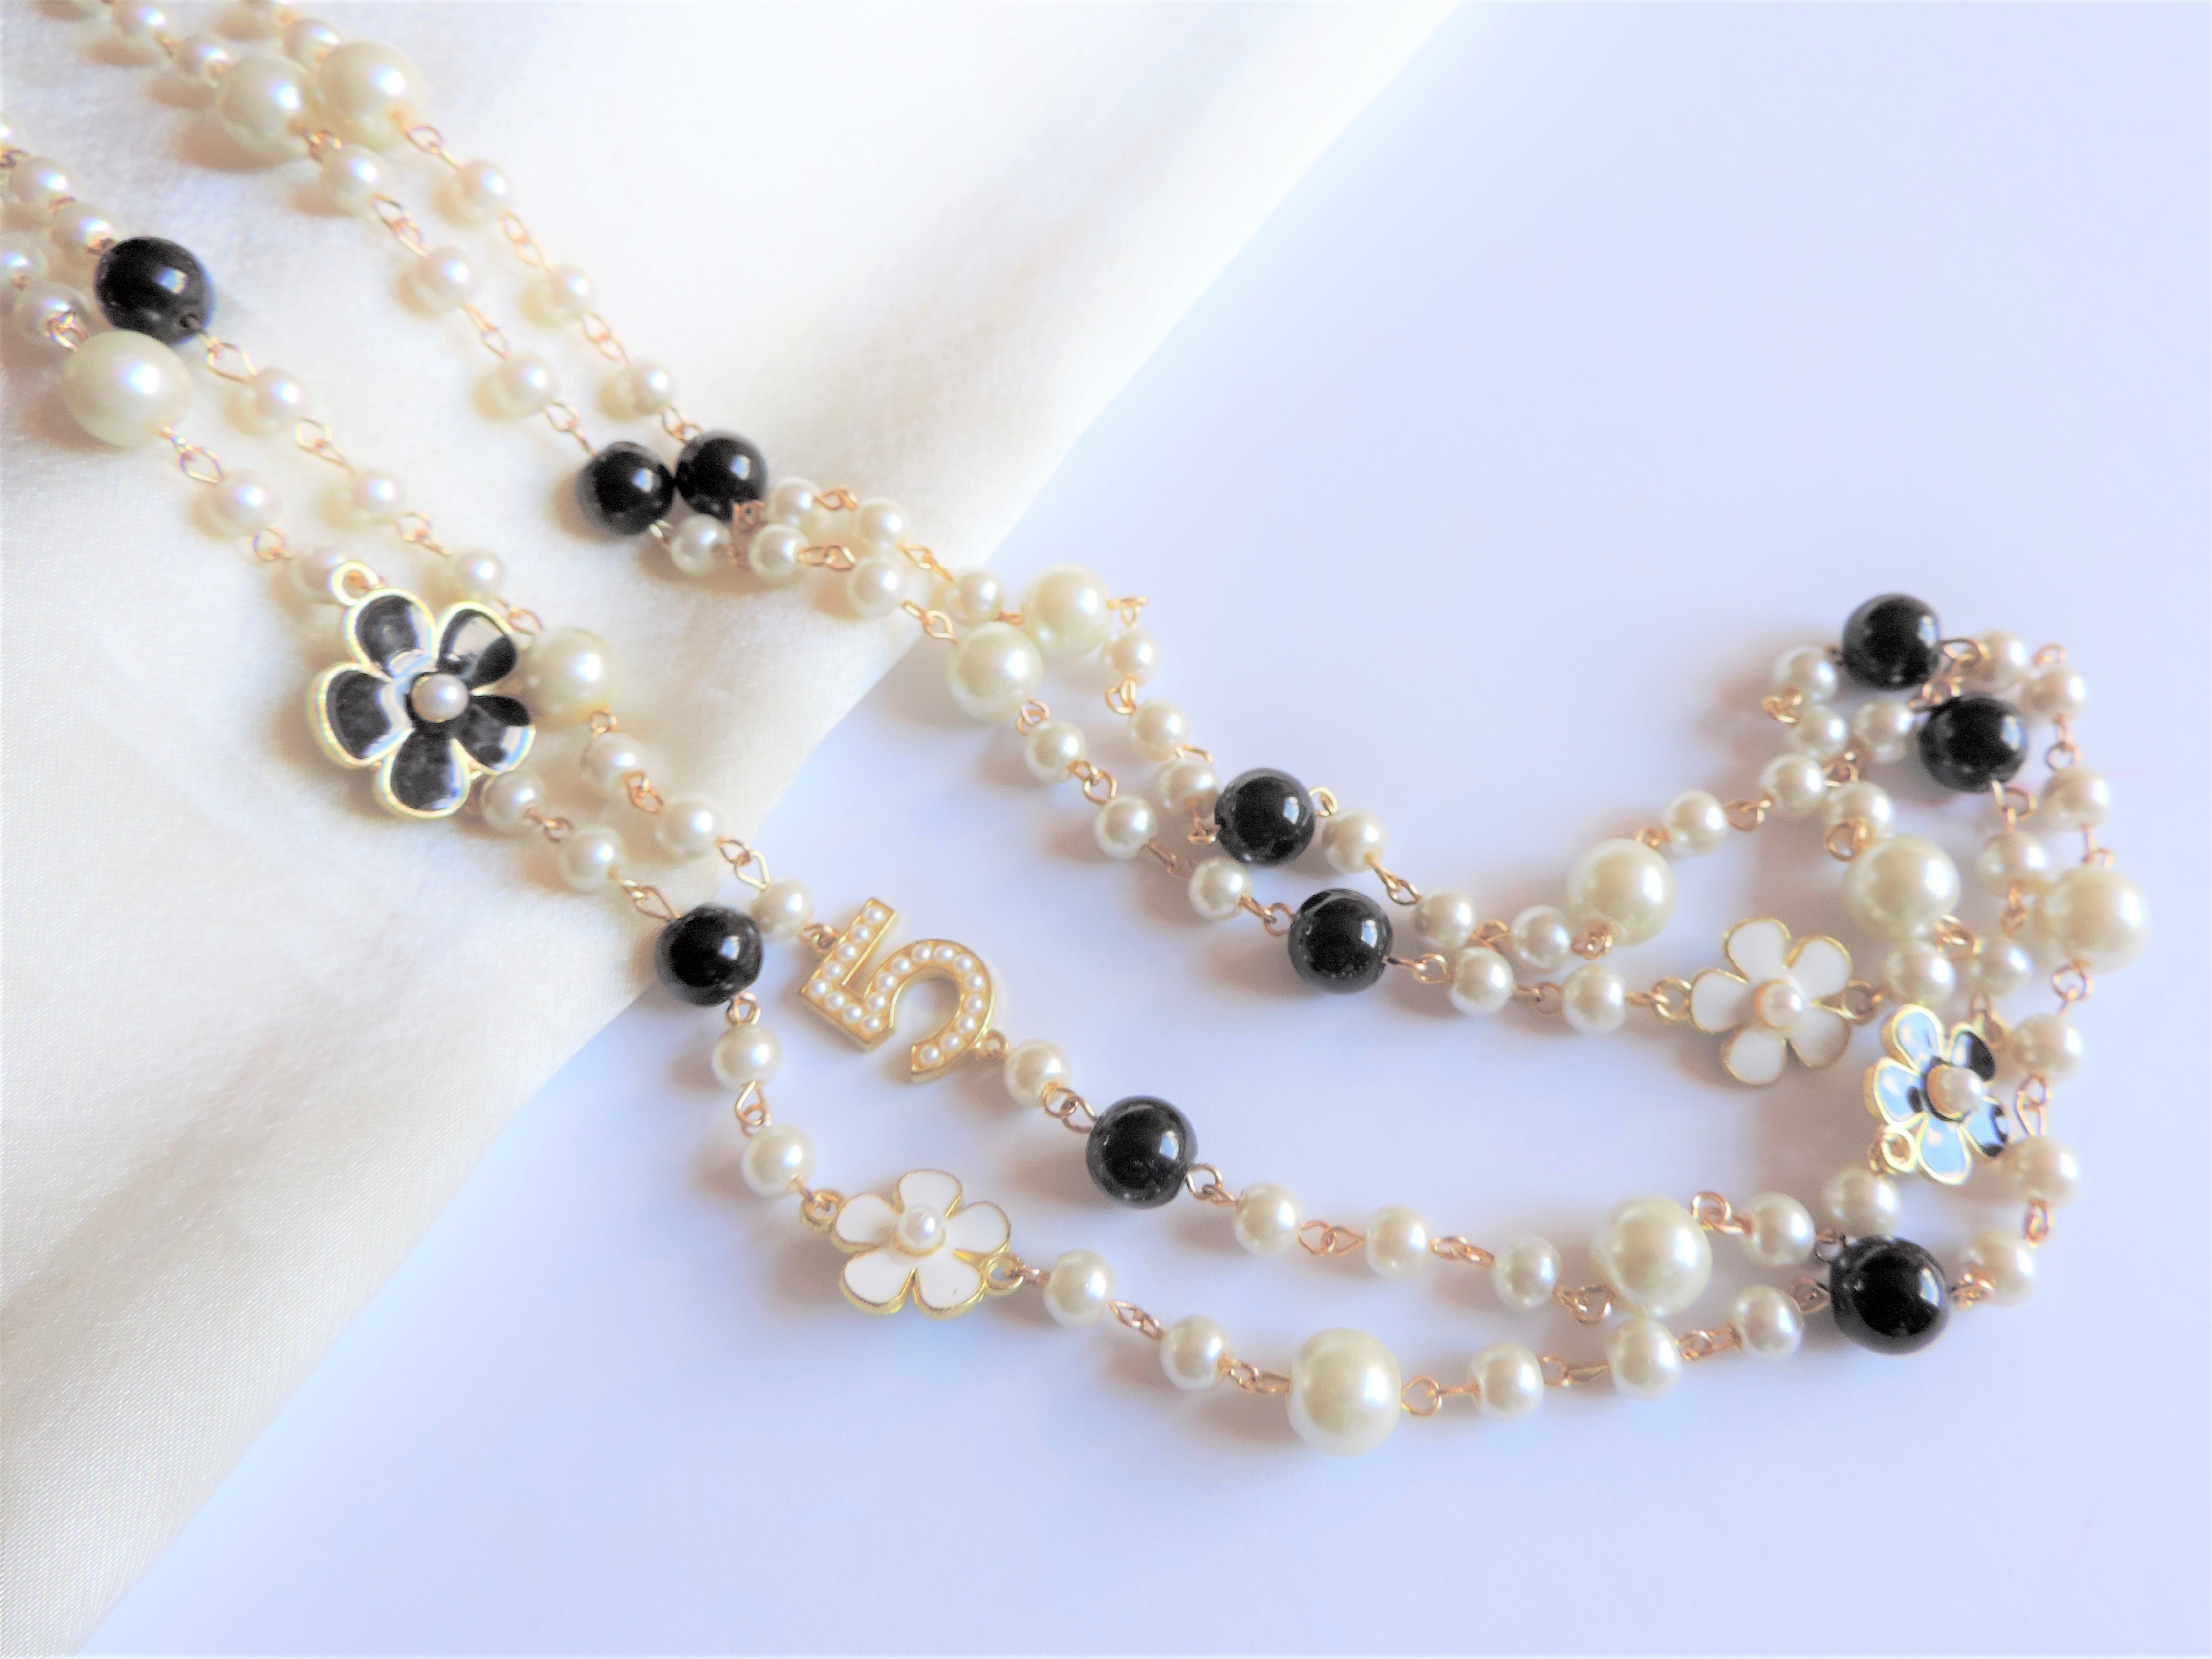 Black and White Number 5 Pearl Necklace 28 inches Long - Image 2 of 4